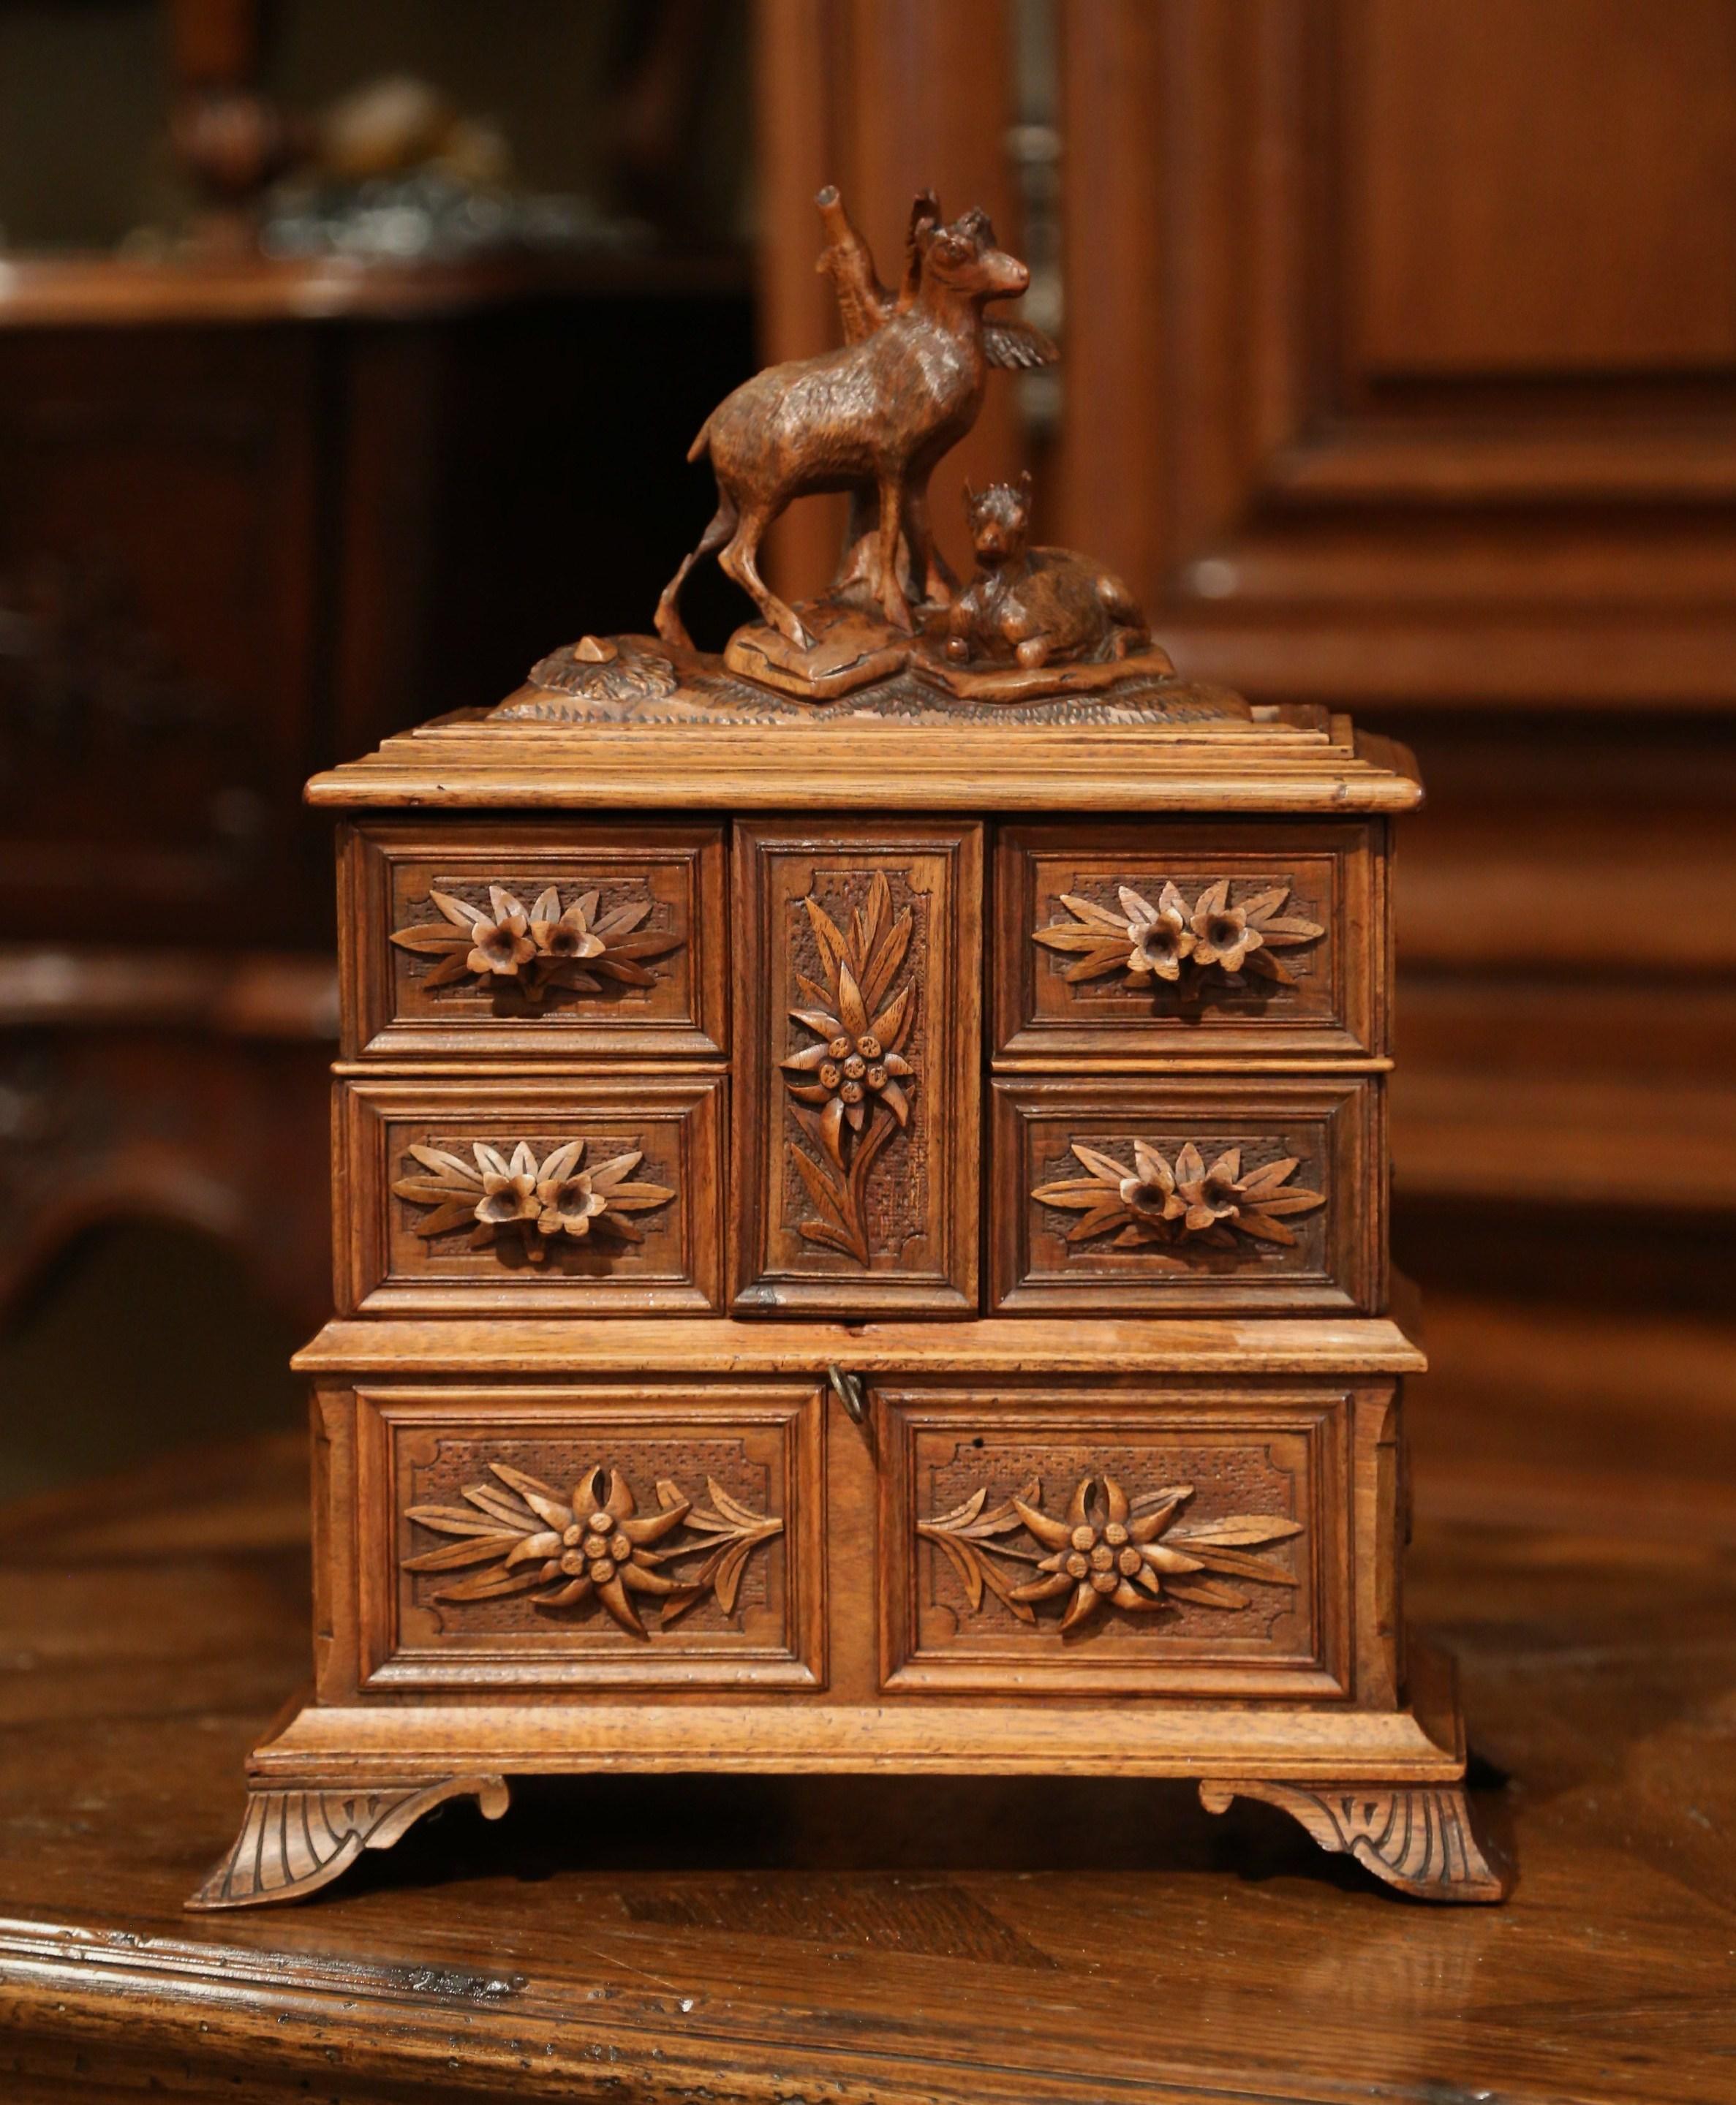 Place your jewelry and small valuable treasures in this beautifully carved decorative box. Created in France, circa 1880, the fruit wood cabinet sits on four feet and features high quality carving decor, including two deer at the pediment